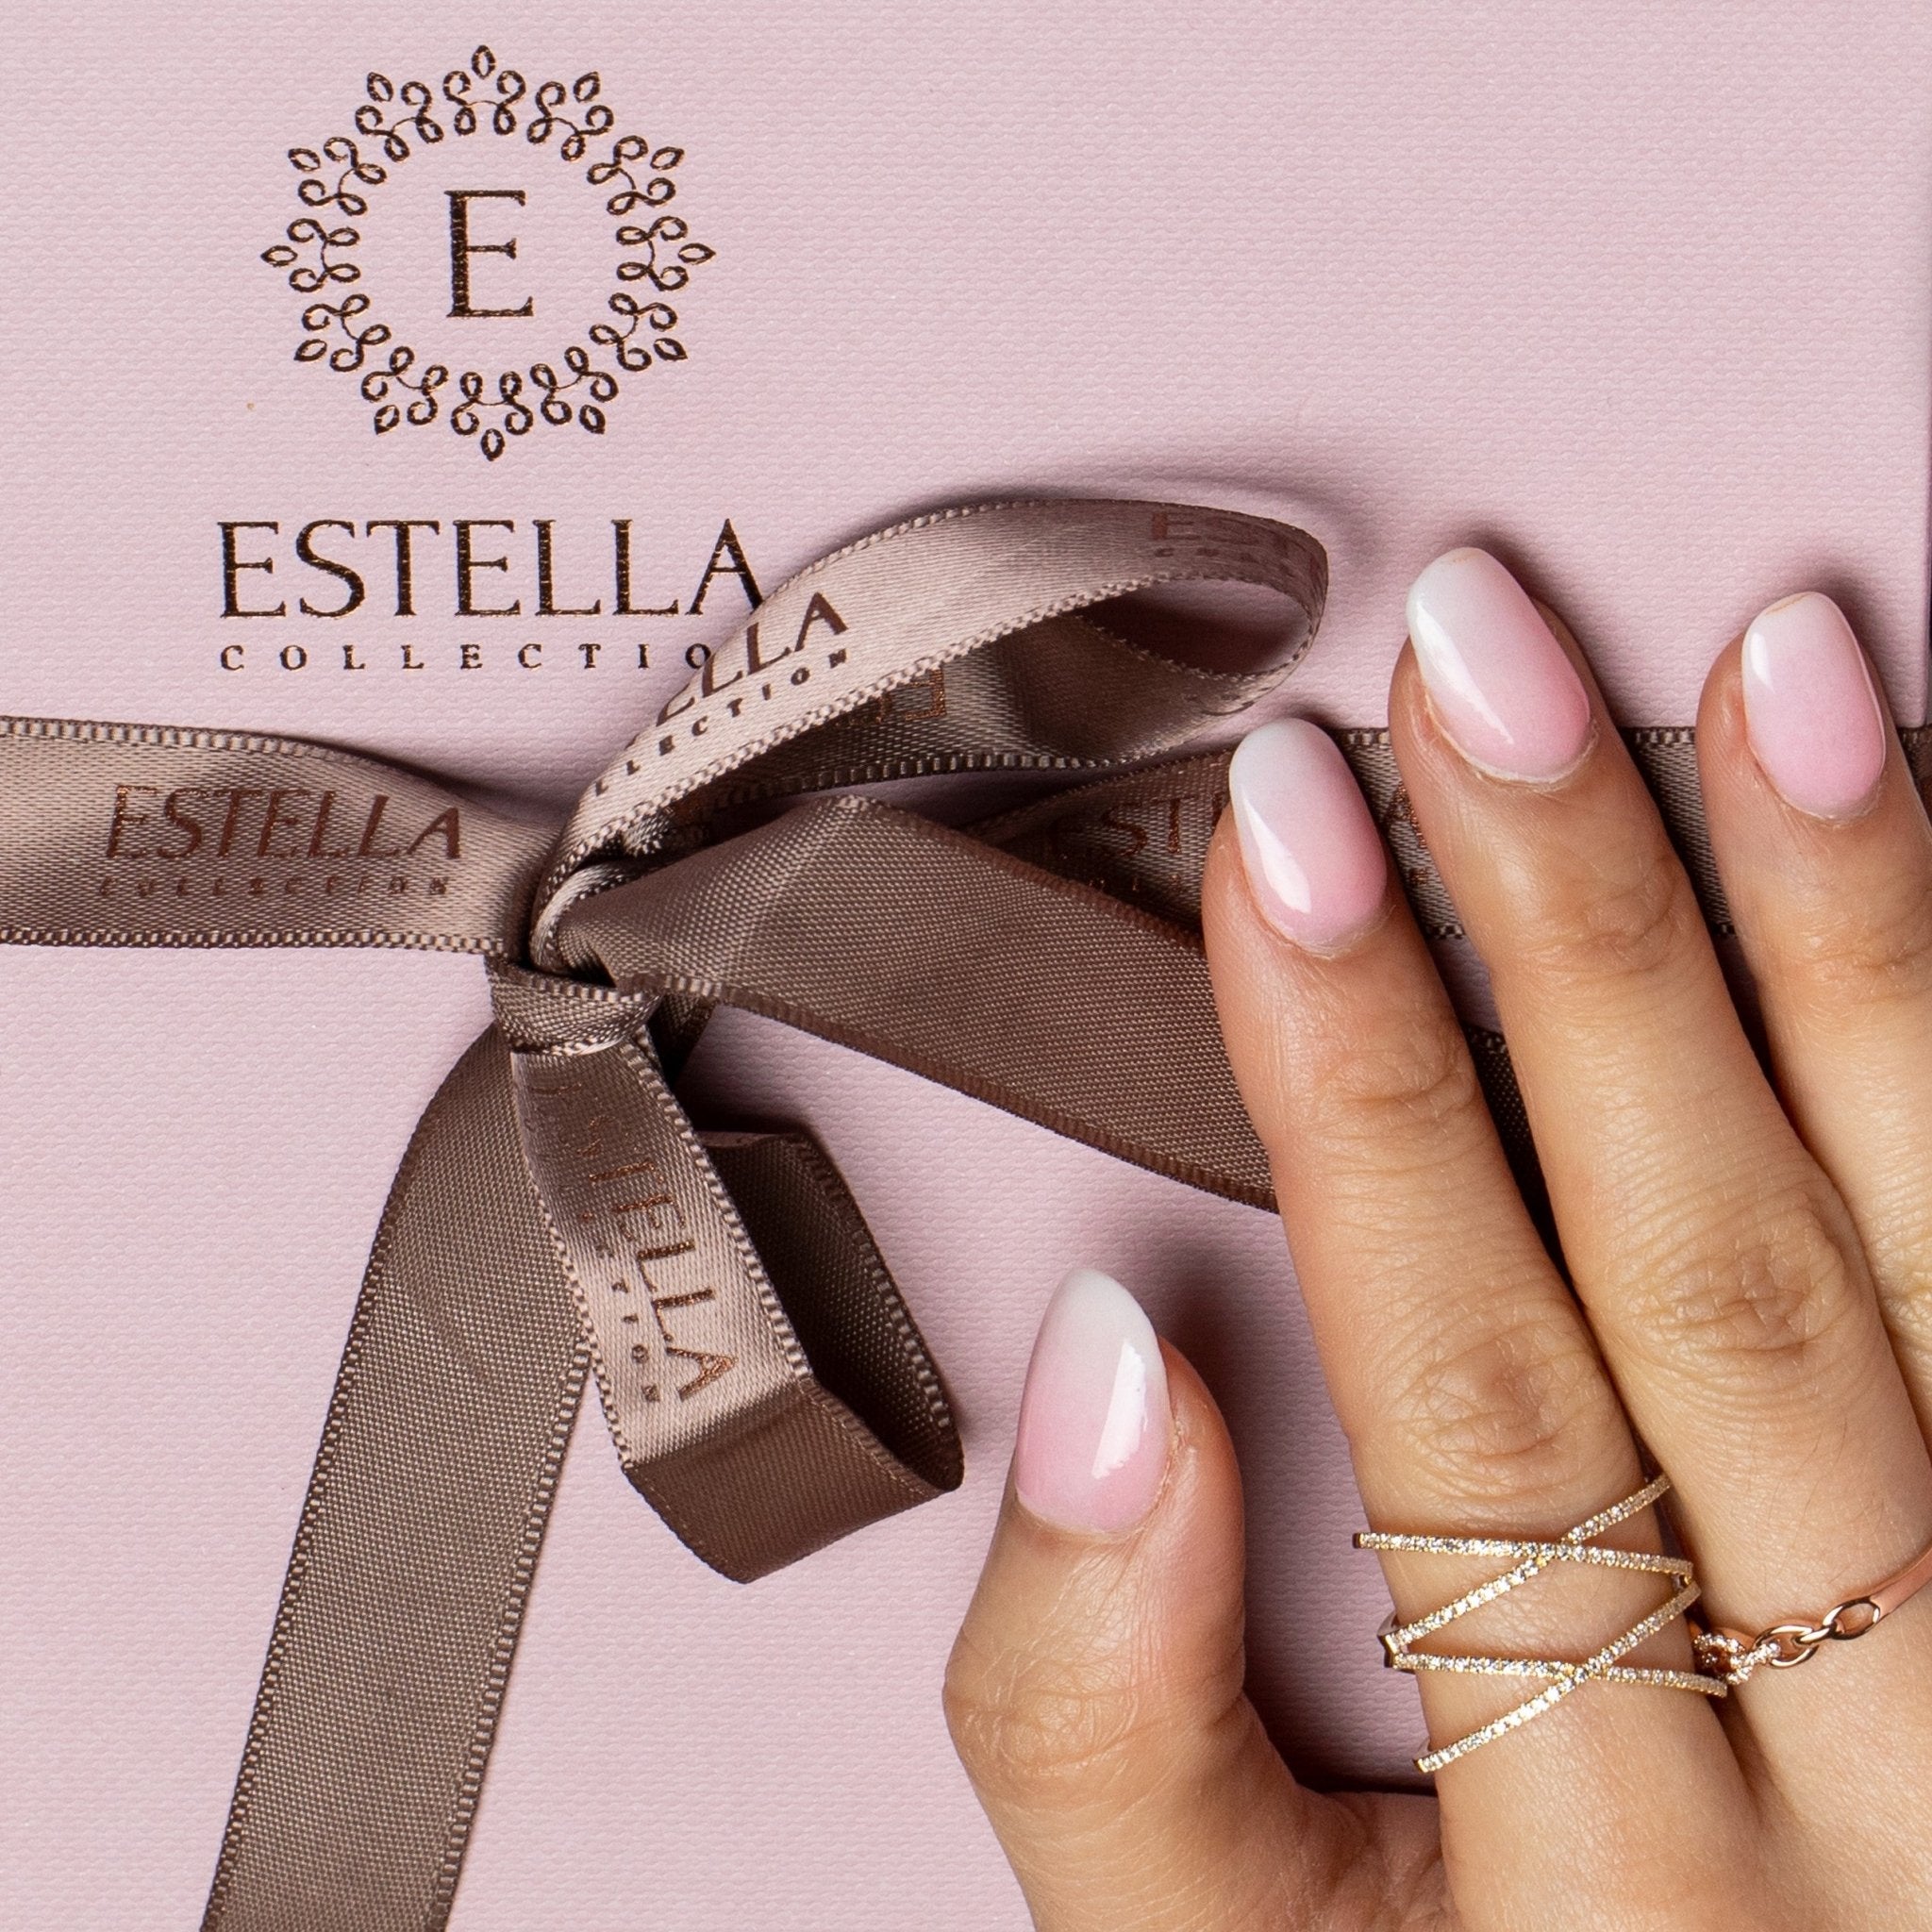 How to Buy a Mother's Day Gift She'll Love - Estella Collection